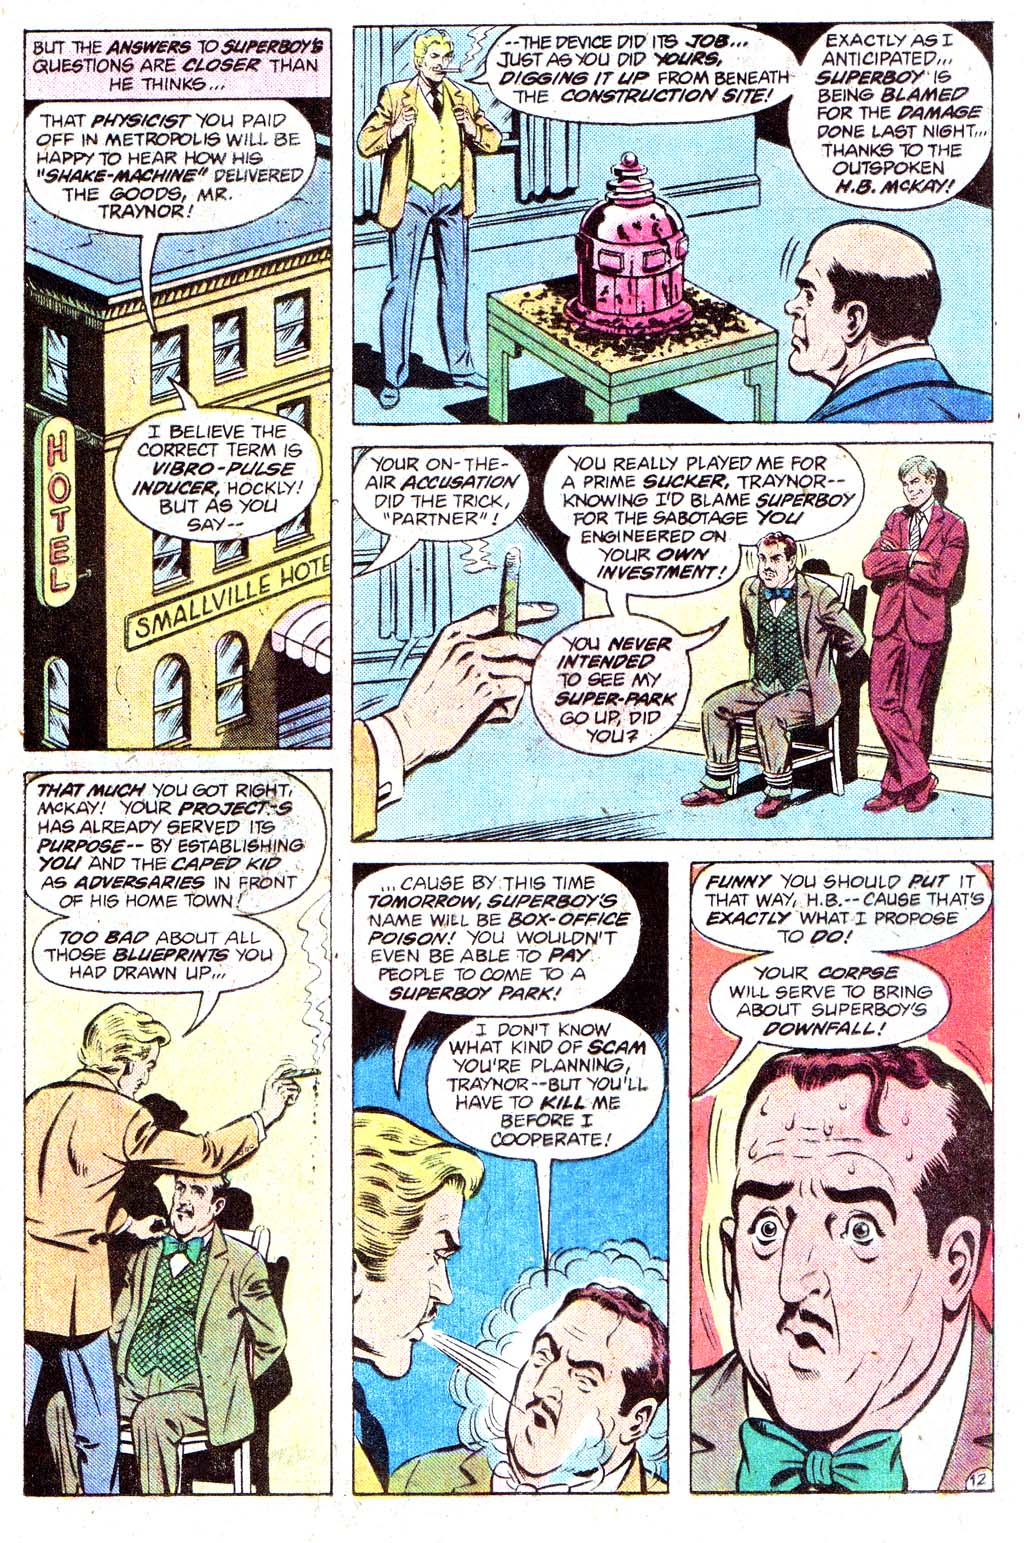 The New Adventures of Superboy 29 Page 16